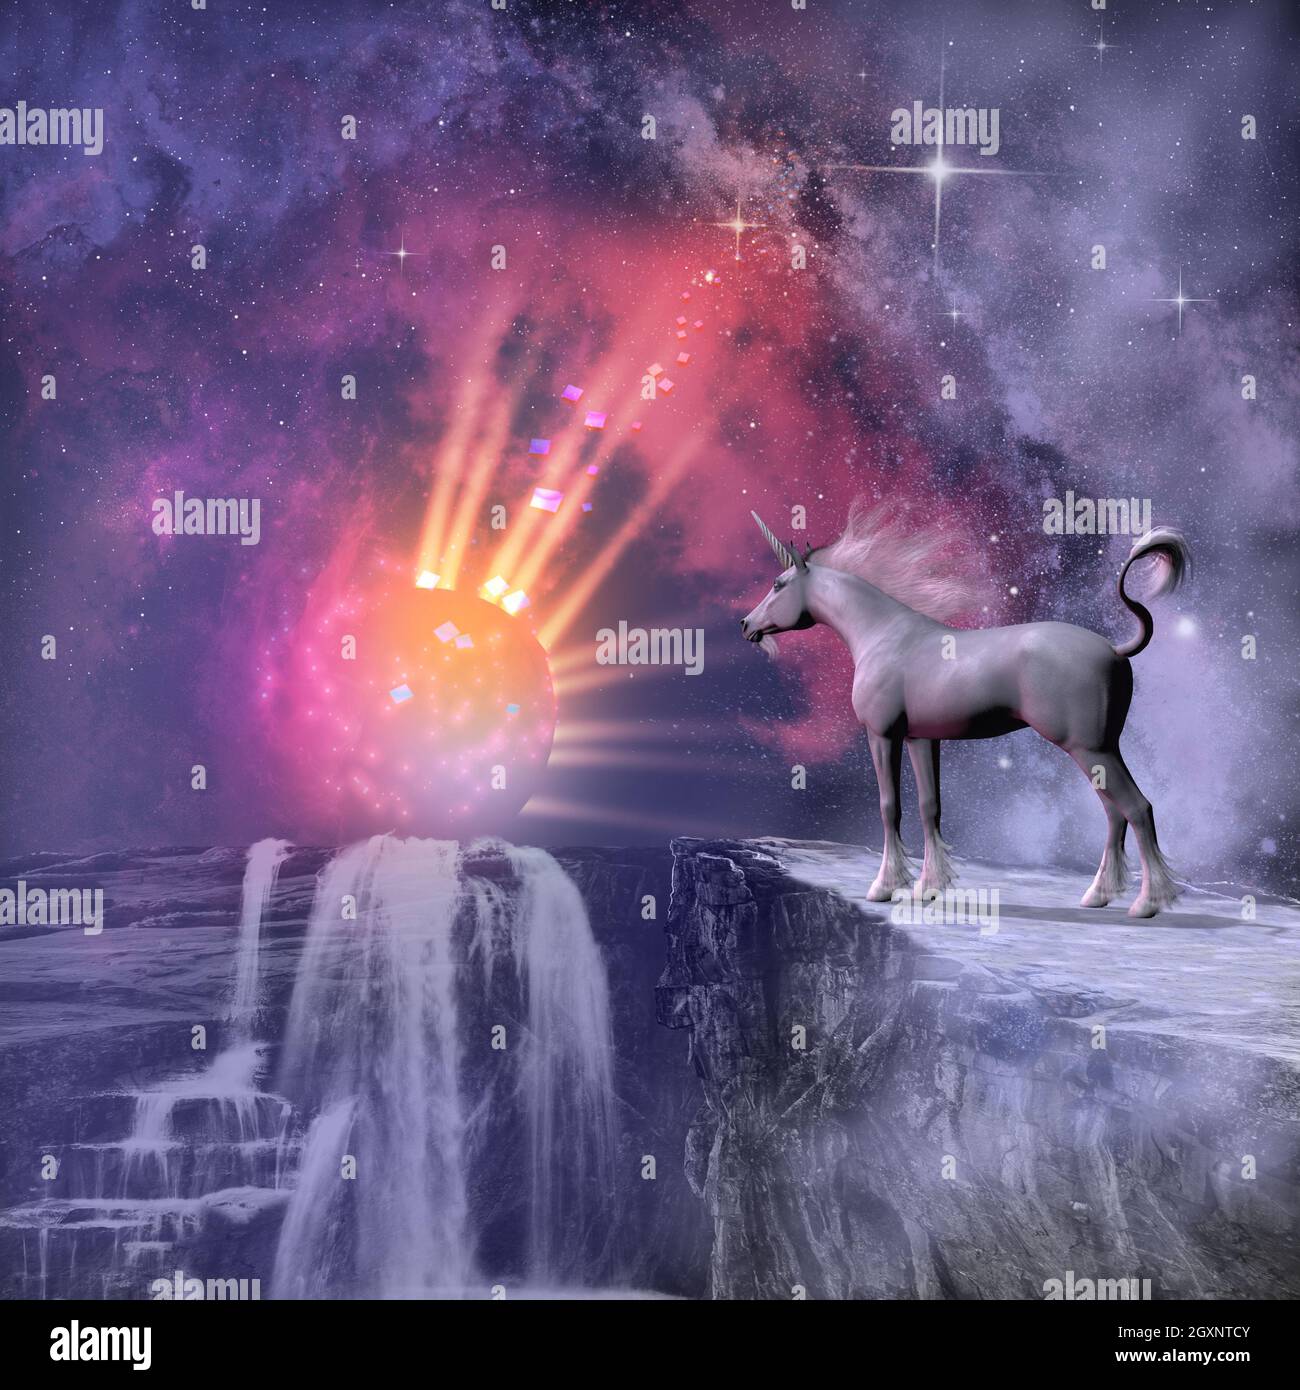 A fantasy image of a white male unicorn and the sun in a dazzling display of rays and light. Stock Photo